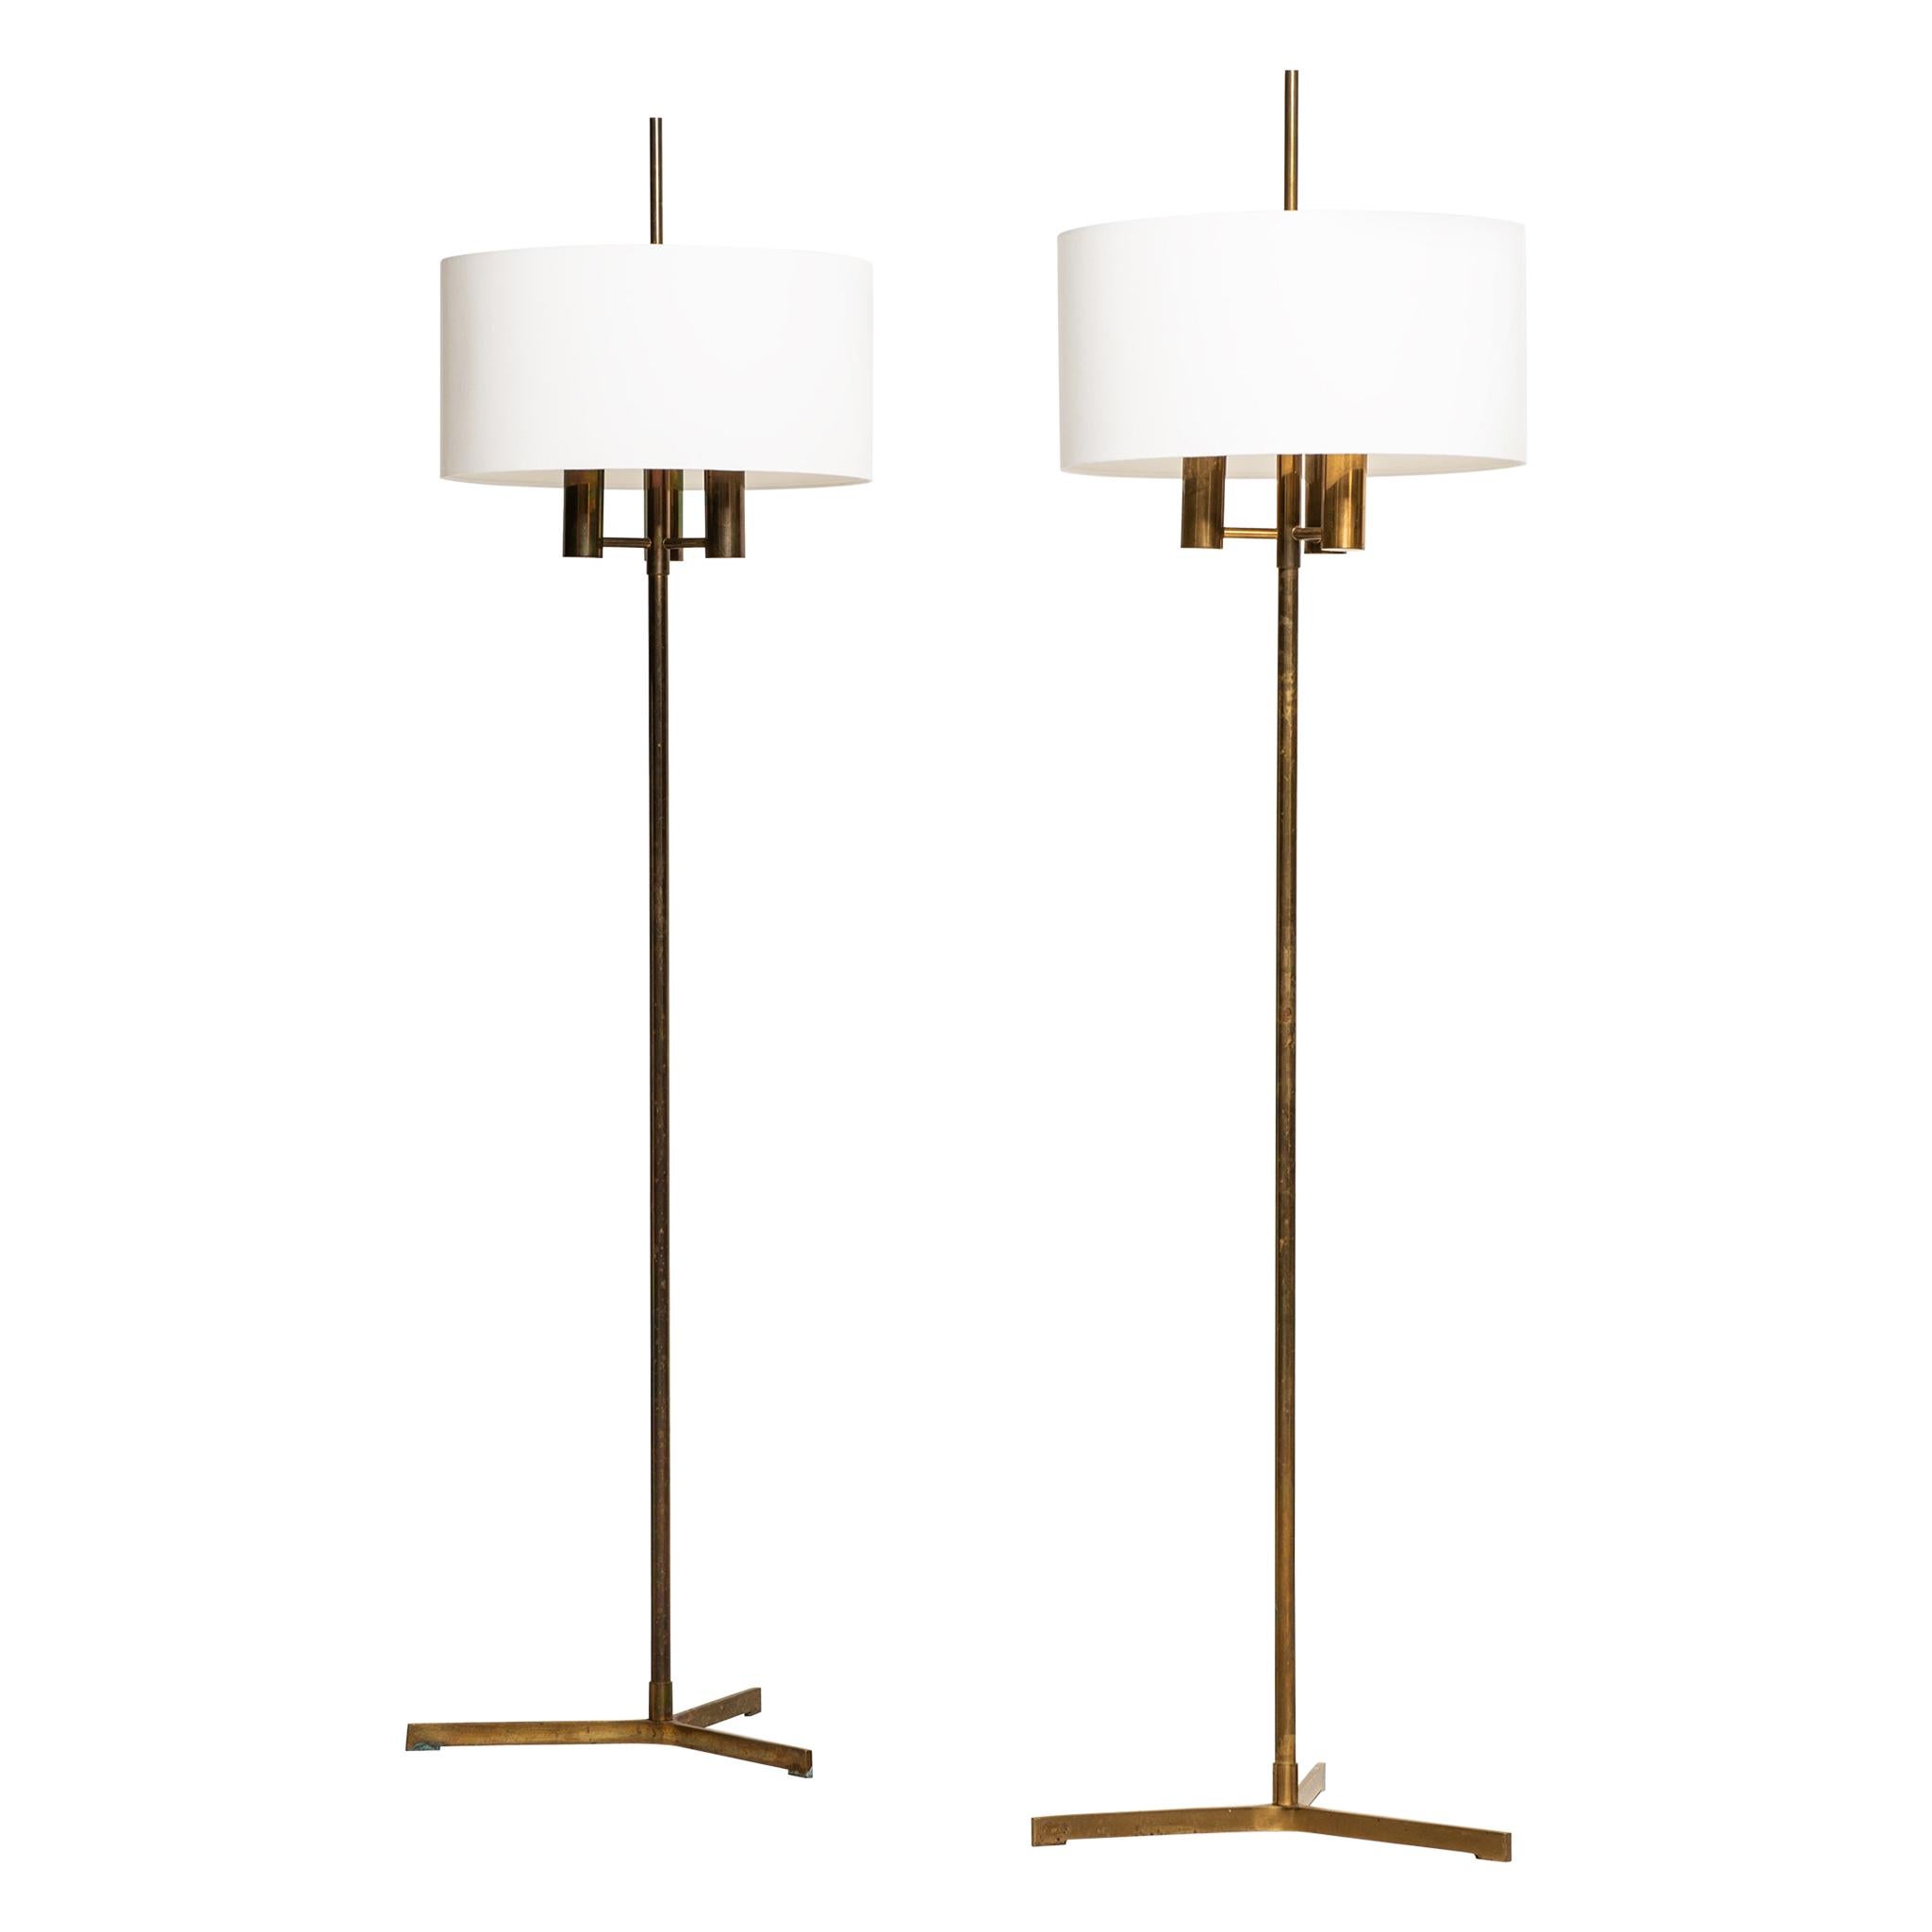 Floor Lamps in the Style of Svend Aage Holm Sørensen Produced in Denmark